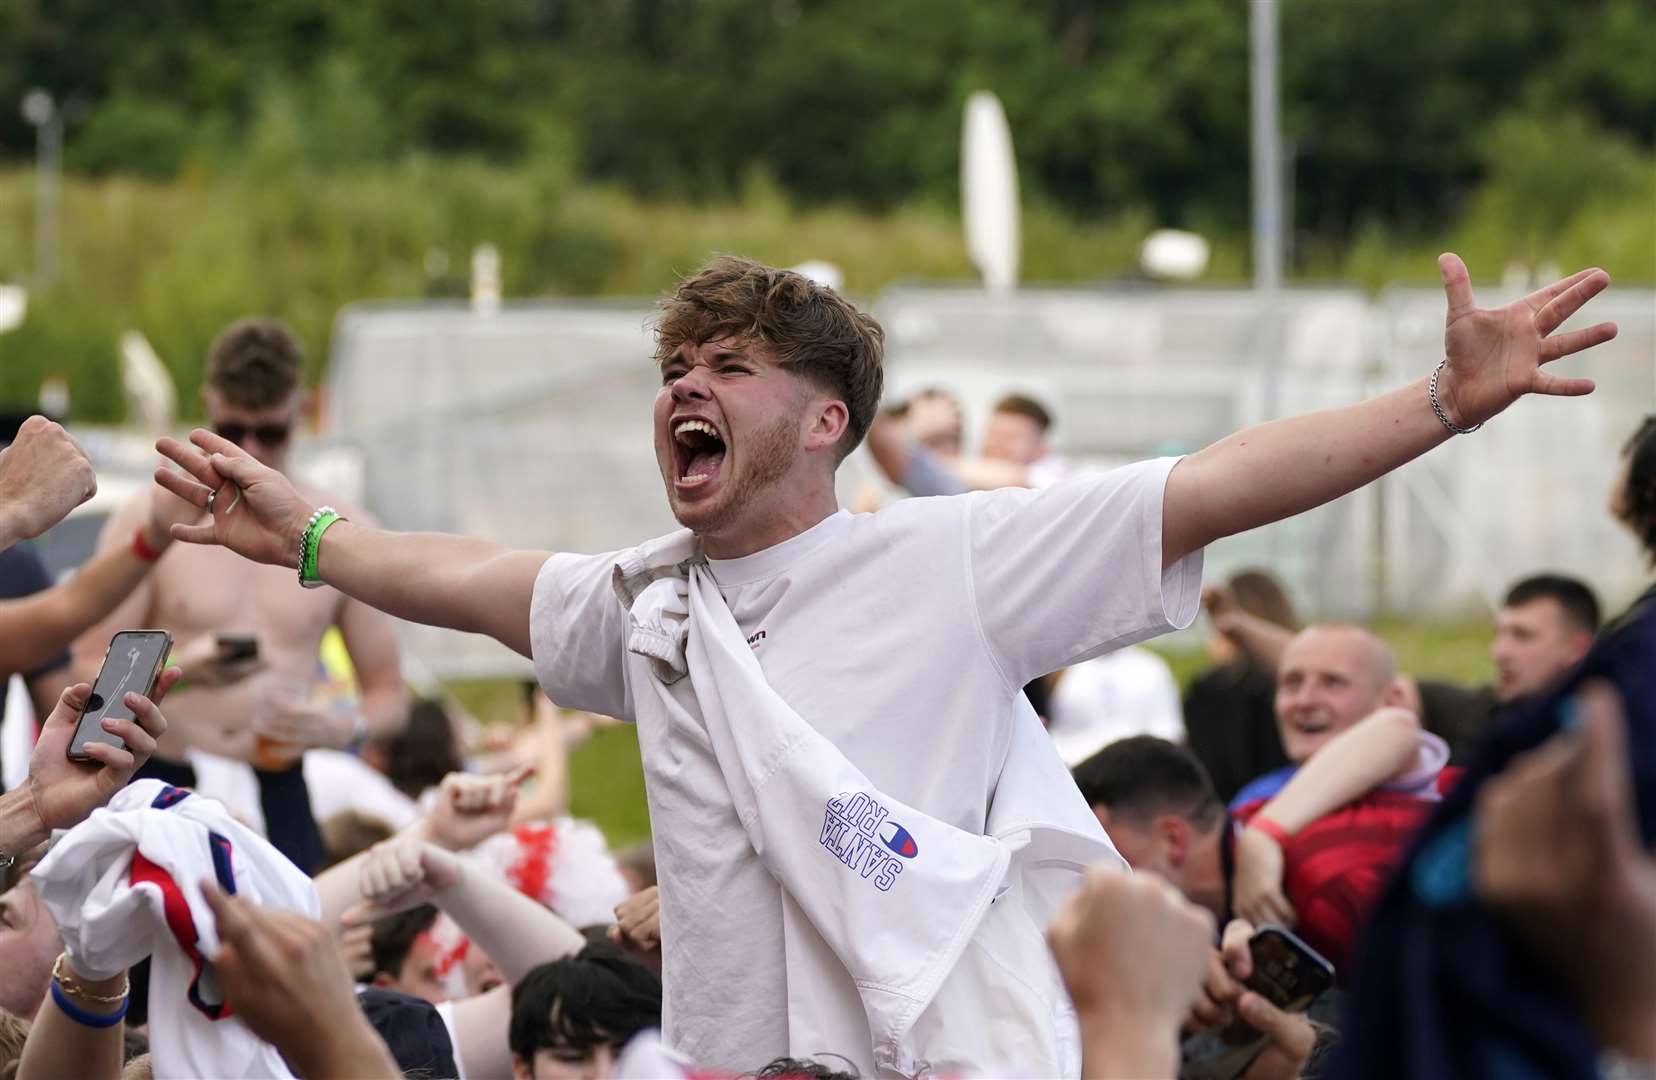 Celebrations at the 4TheFans fan park in Manchester (Peter Byrne/PA)